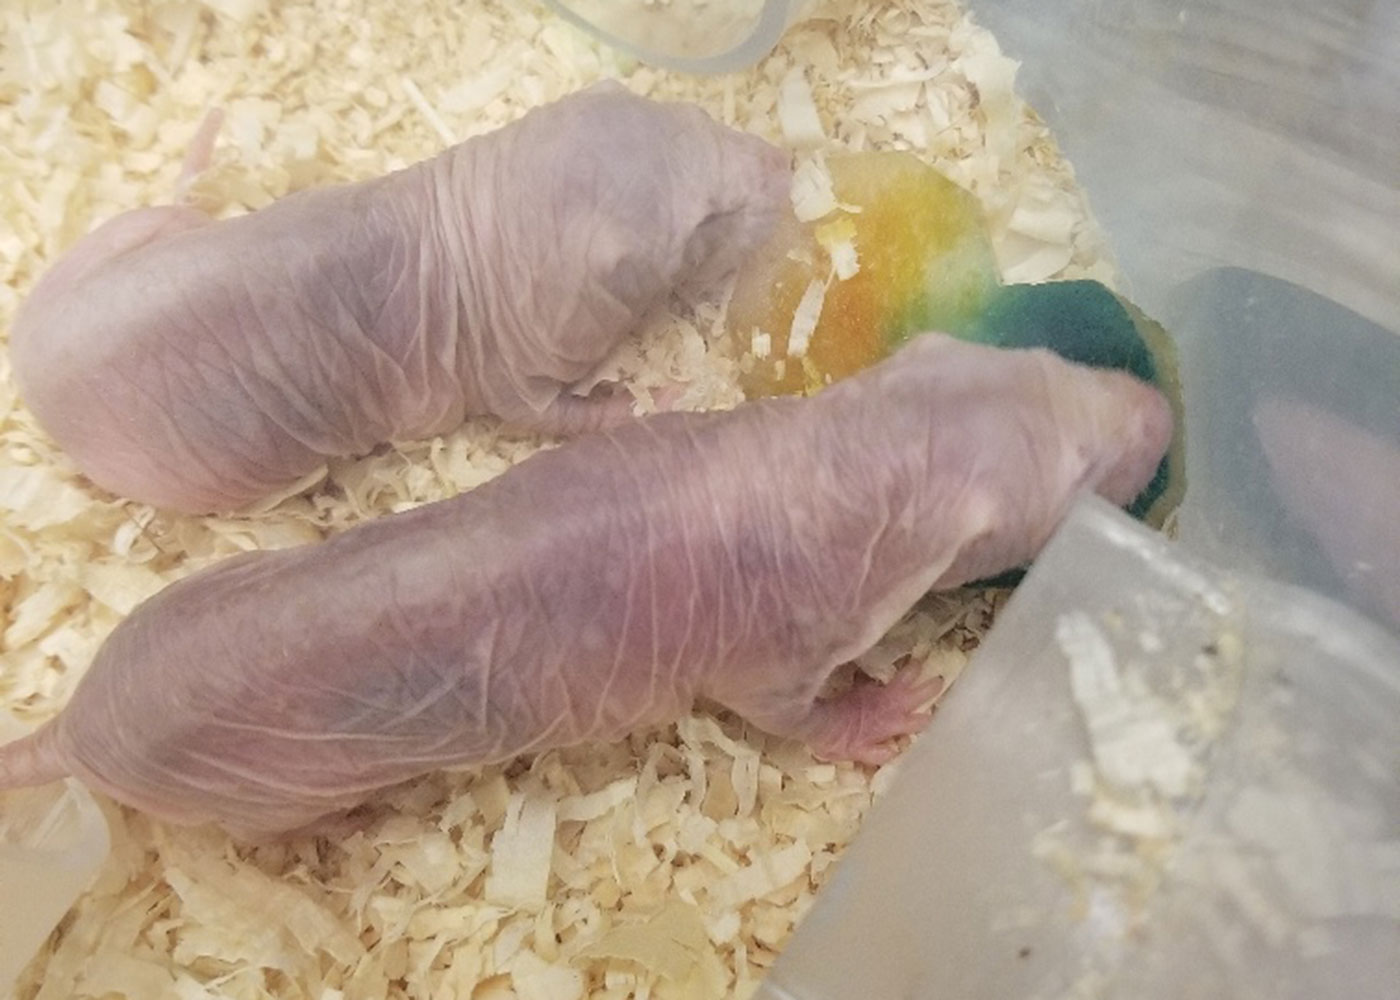 Two naked mole-rats eat a special heart-shaped treat for International Family Equality Day at the Zoo